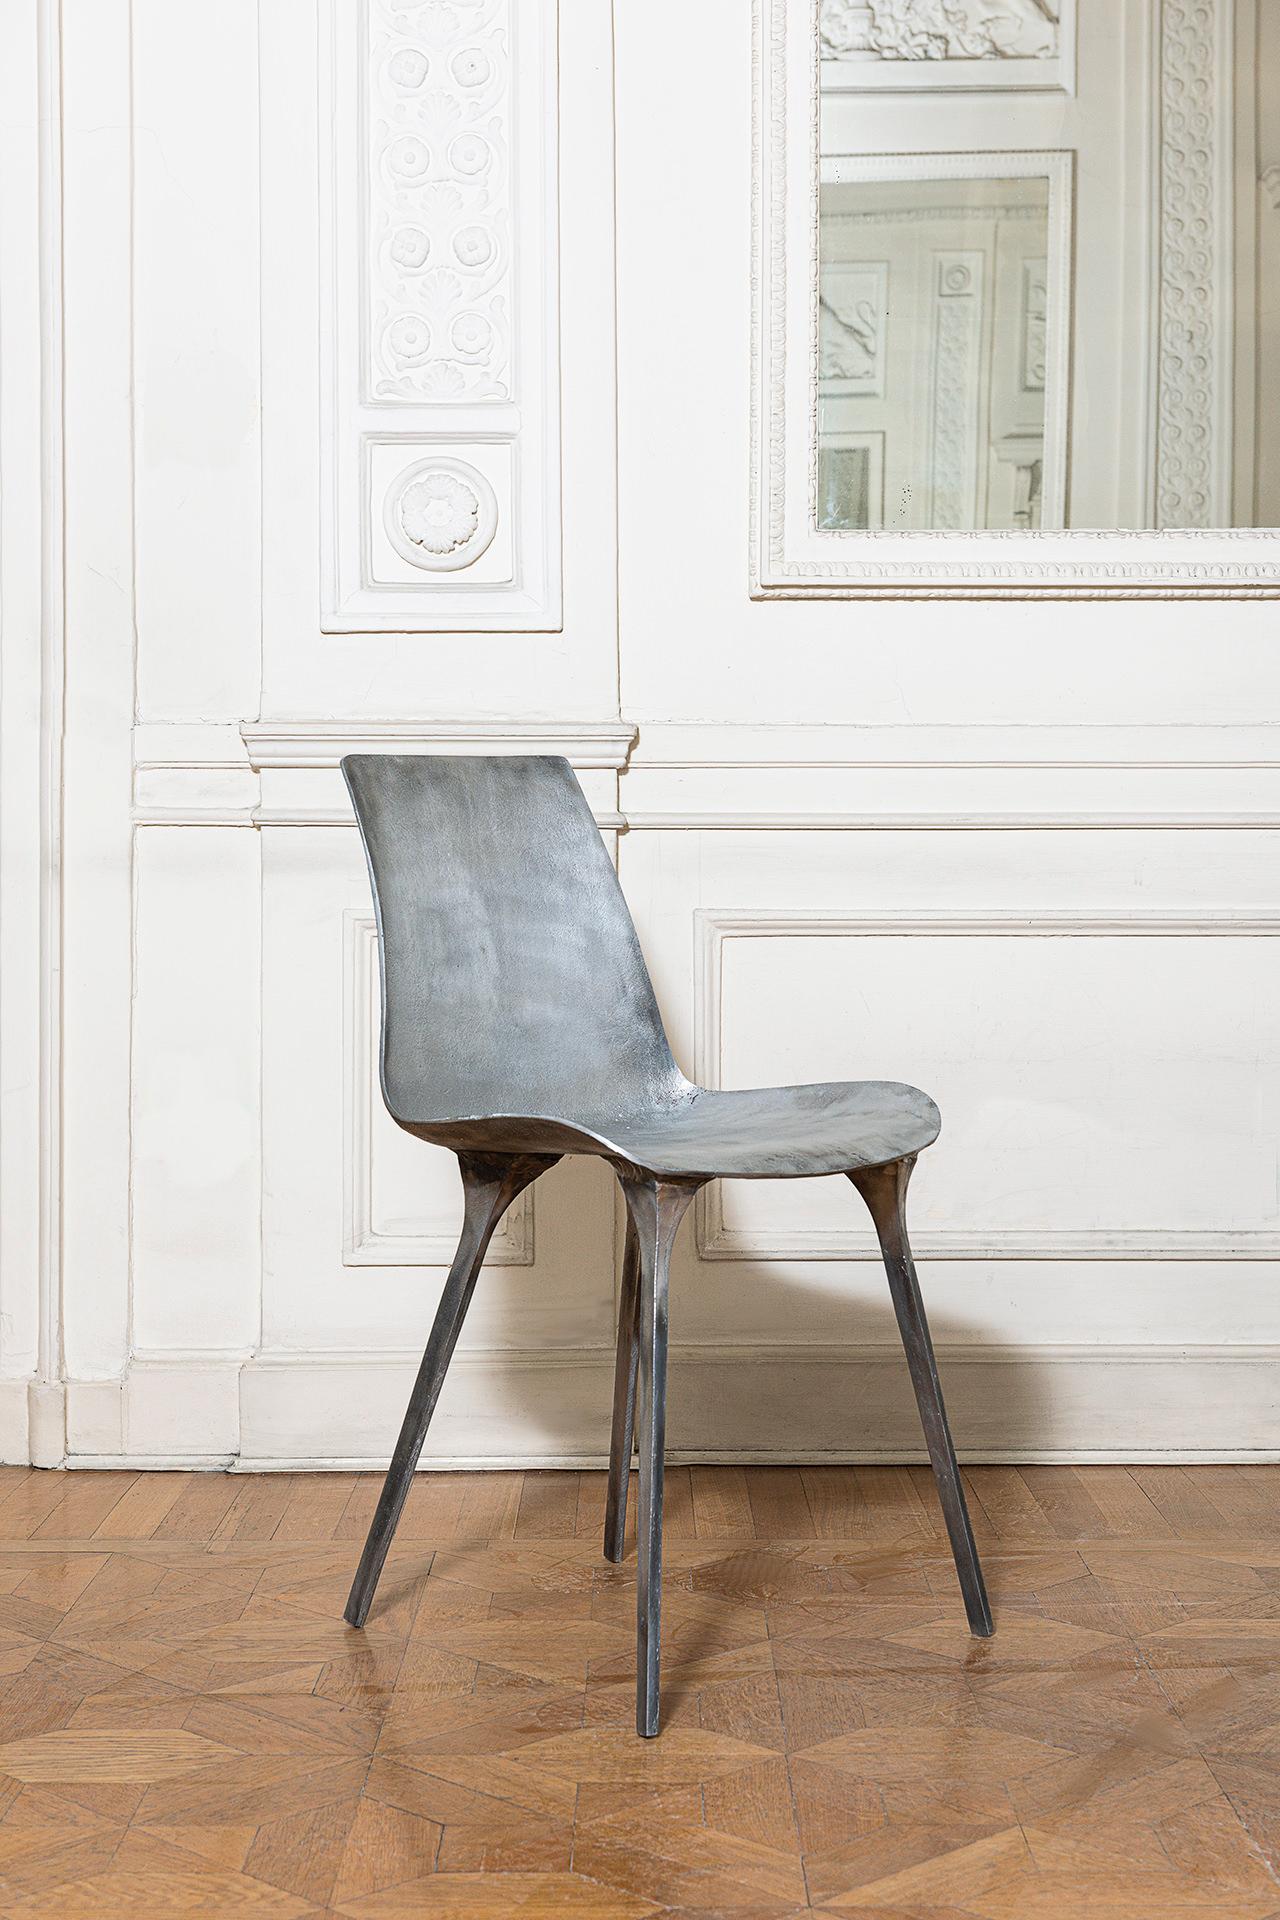 The solid metal Sylvie chair is made entirely of cast aluminum silver, left in its unfinished state. The body is formed of a shell-like seat with a rounded backrest and four tapered legs. The textured surface of the solid metal chair makes it seem